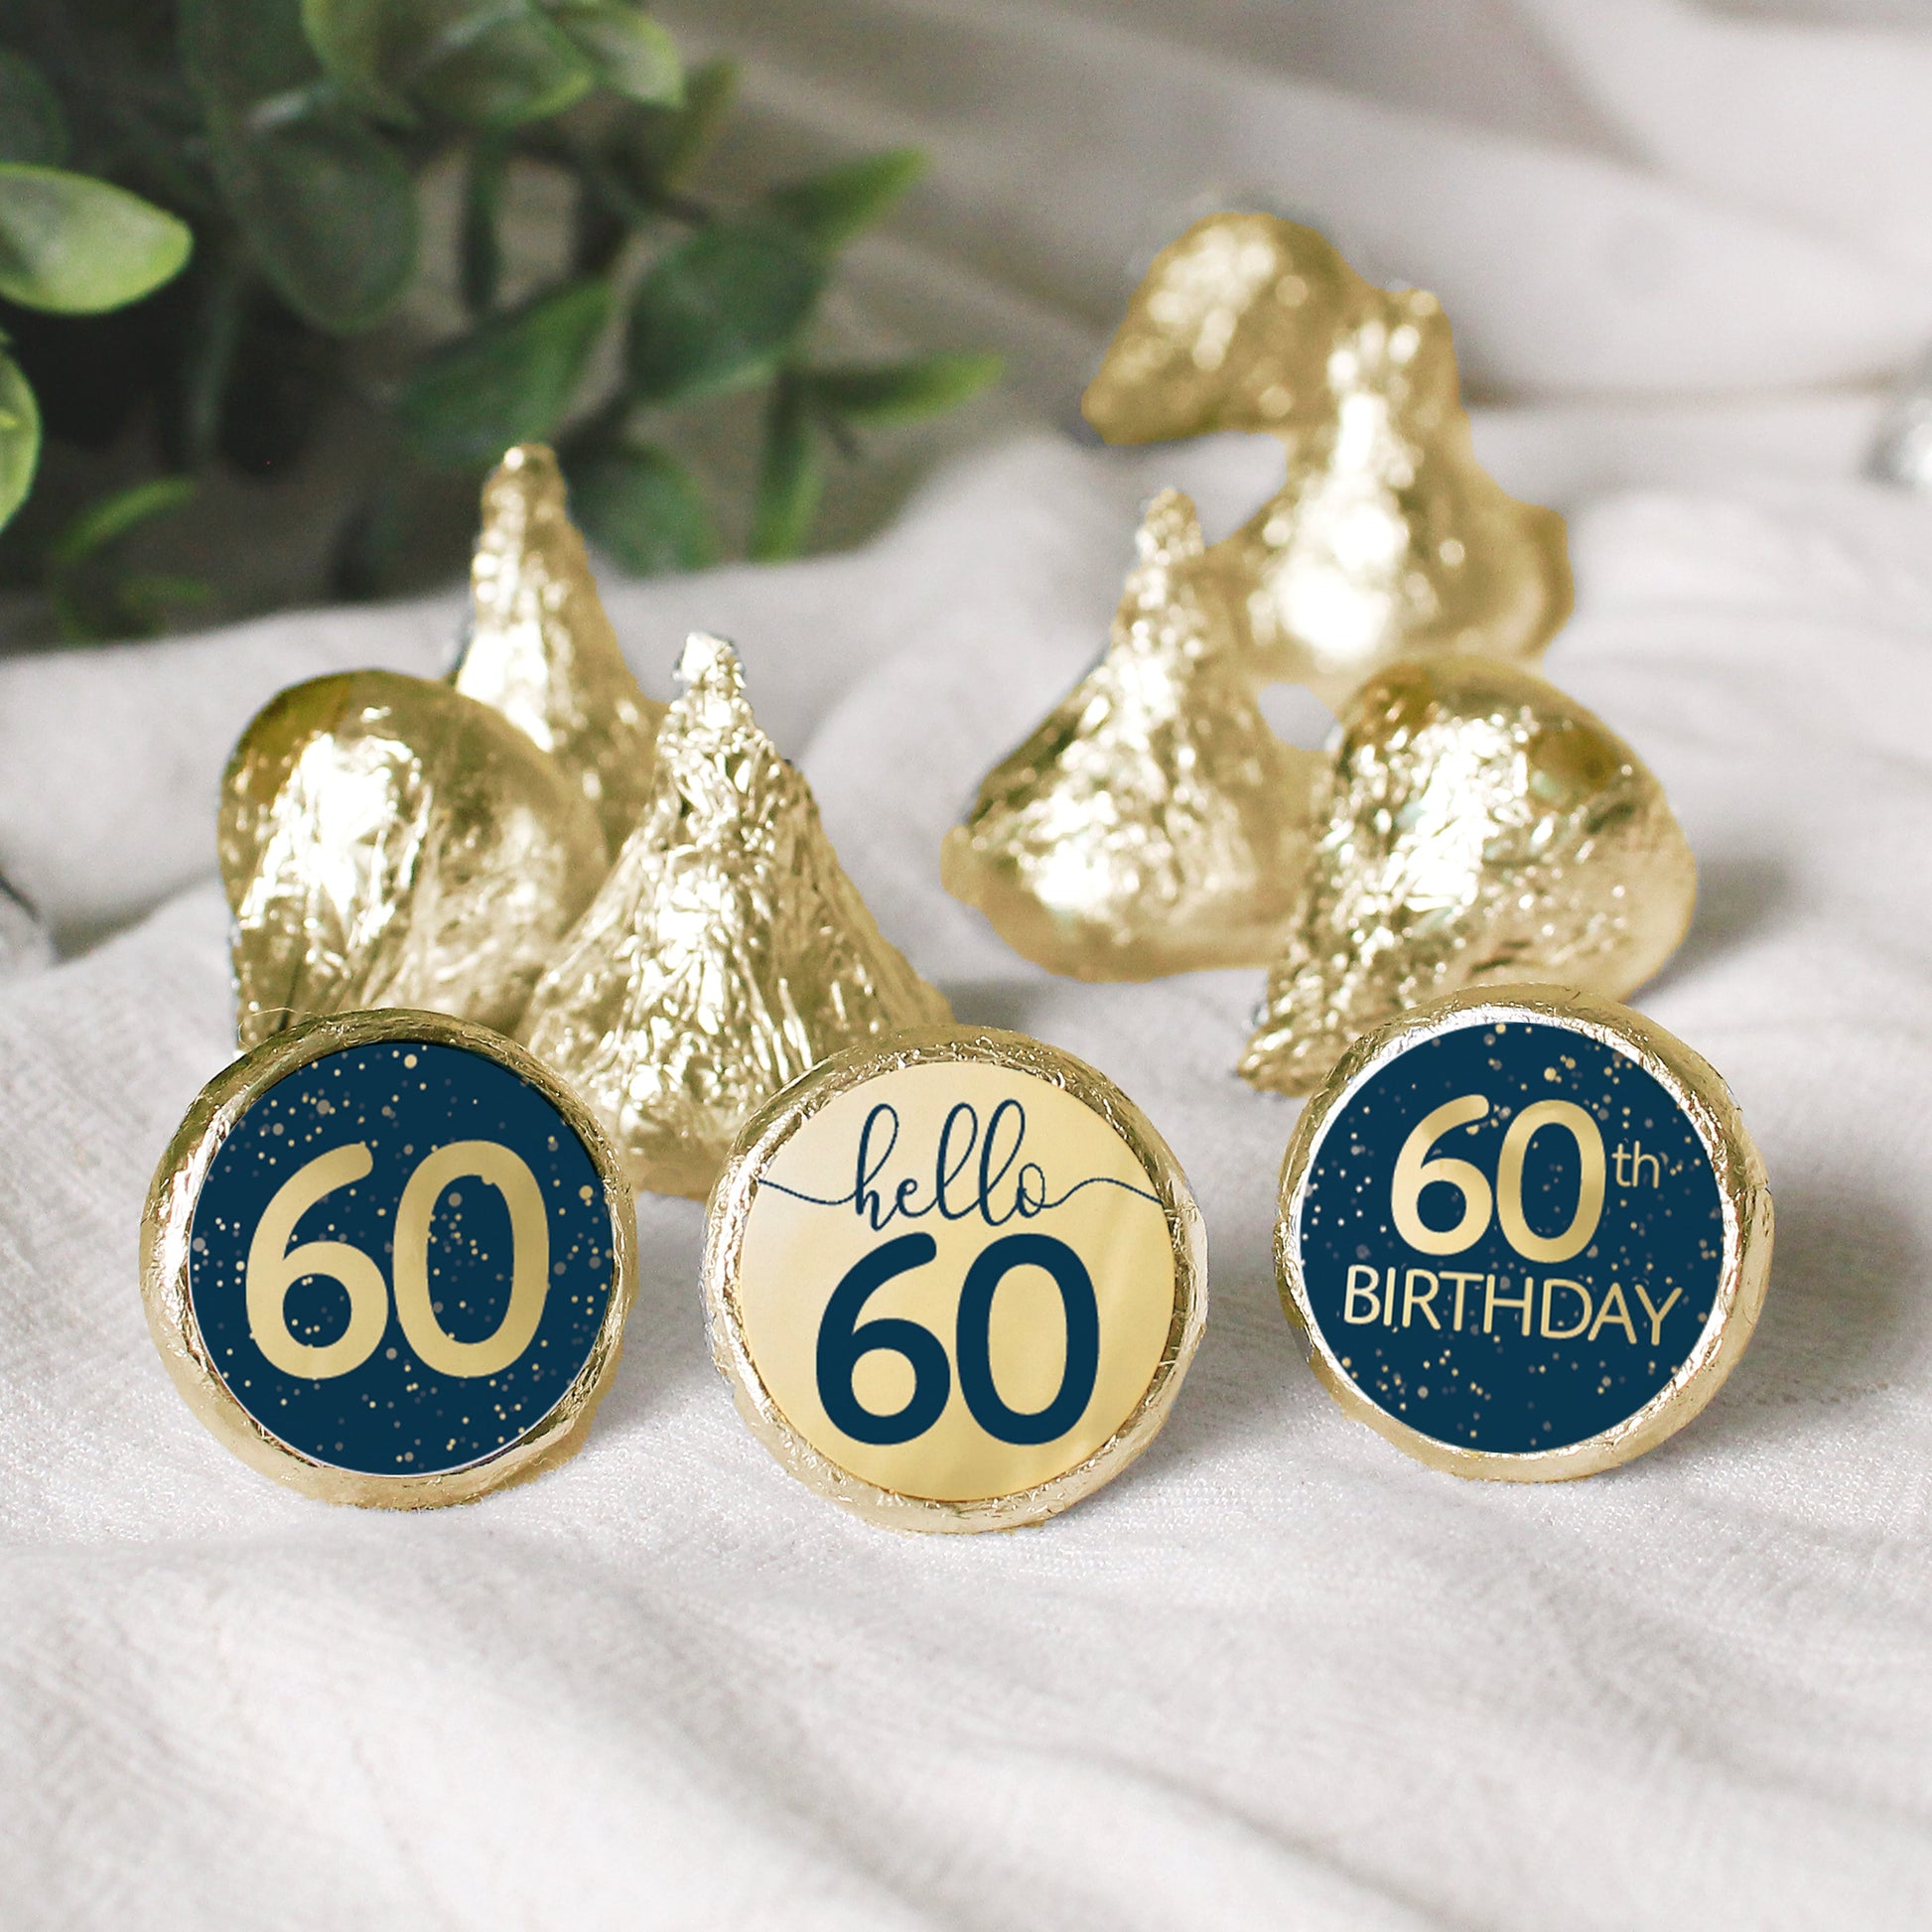 Premium navy blue and gold foil stickers perfect for decorating candy for an 60th birthday party